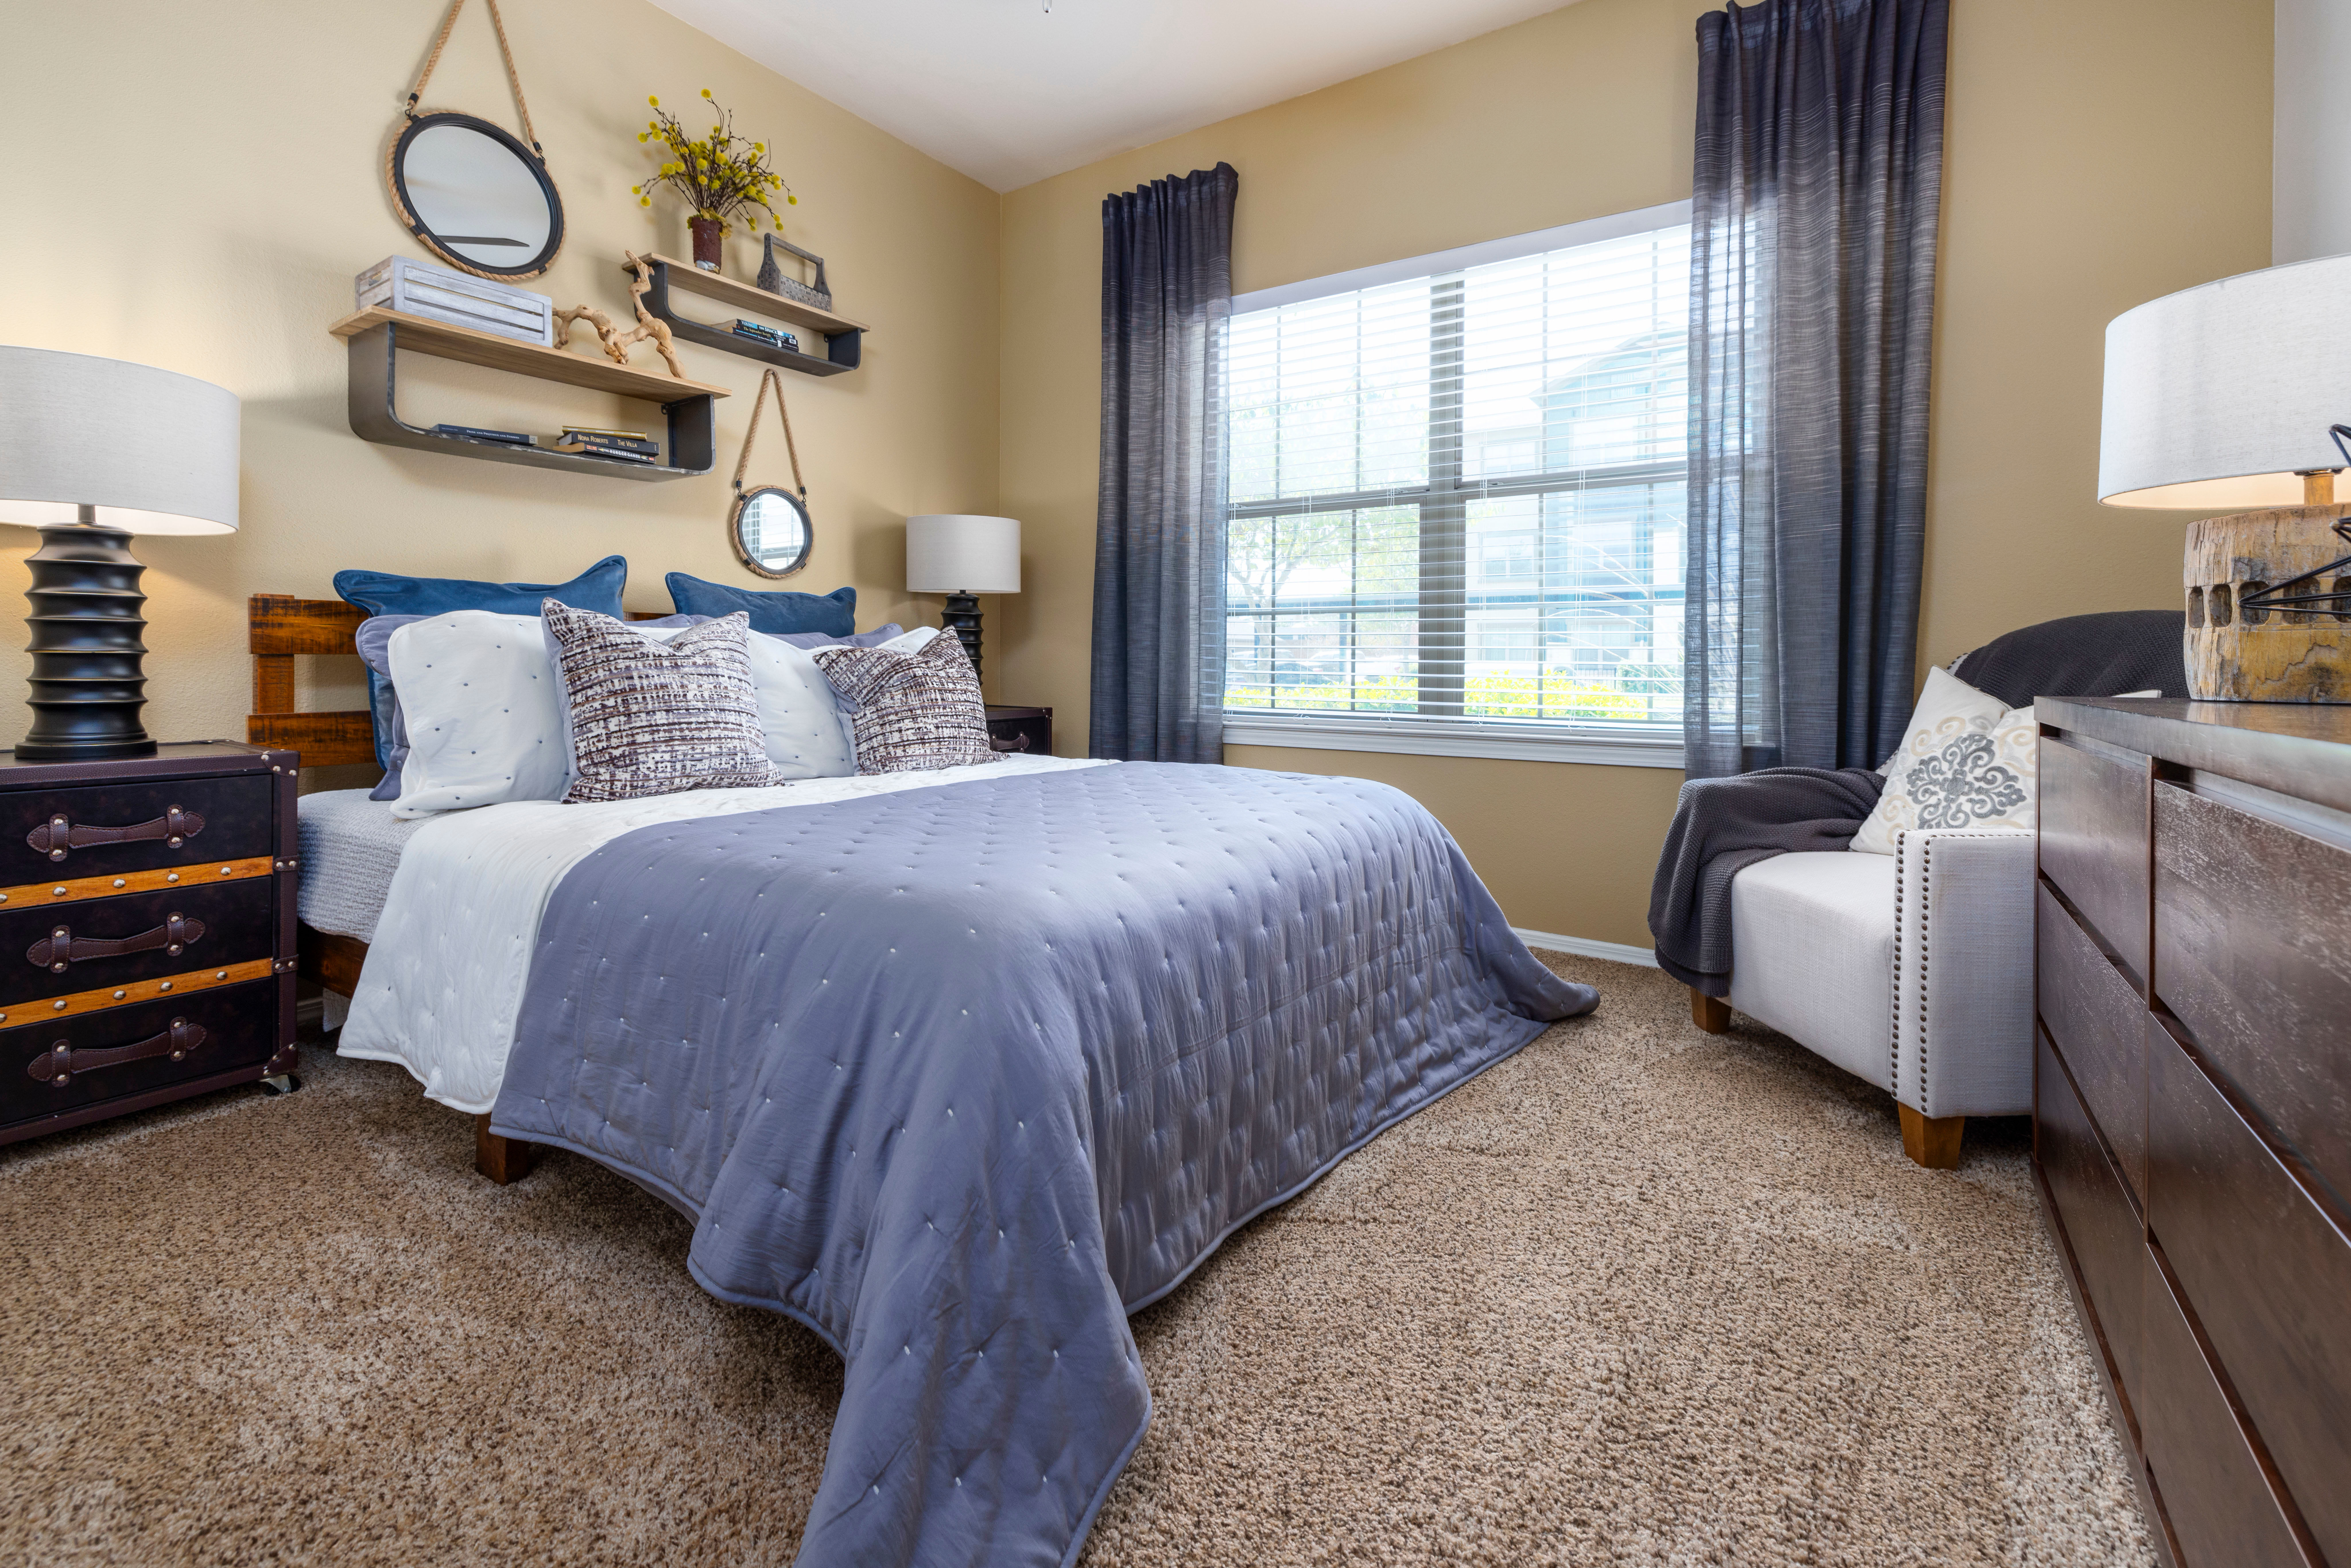 Bedroom of a model apartment home at Carrington Oaks in Buda, Texas